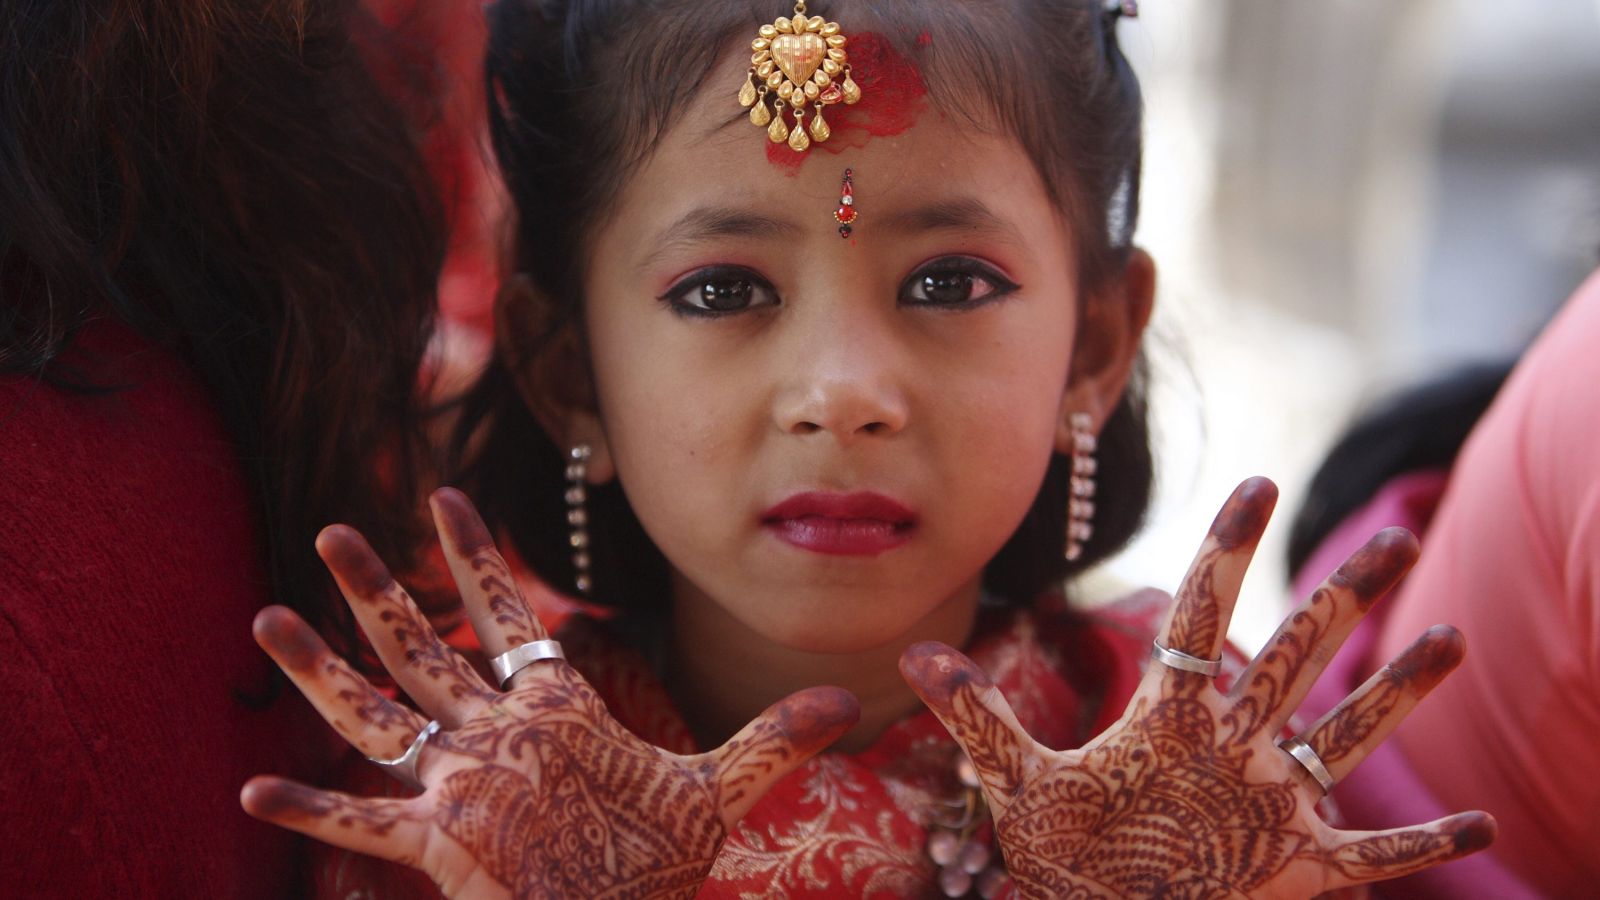 Odia girls are combating child marriage pic